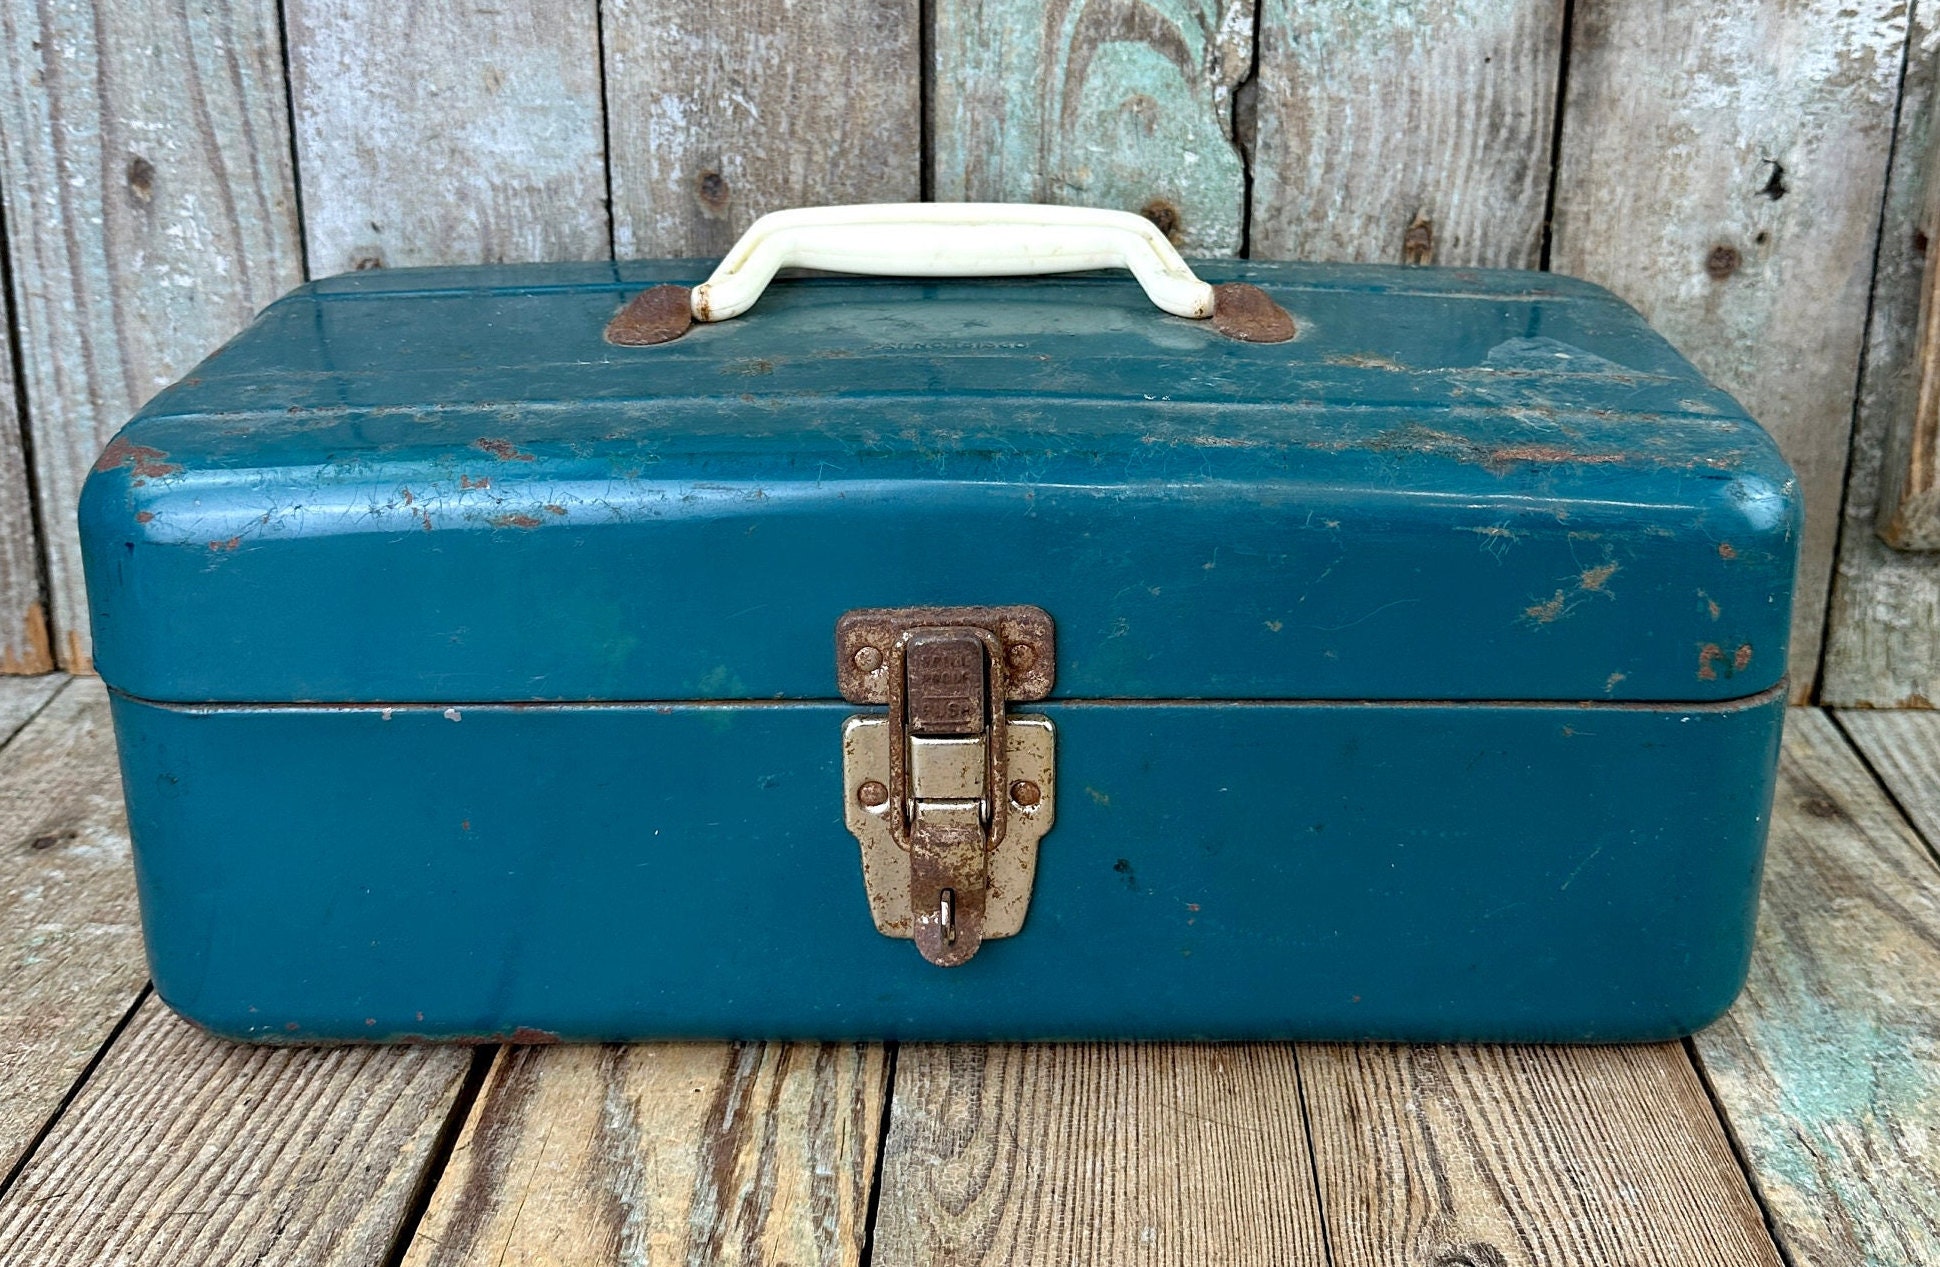 Rusty Old Tackle Box Vintage Metal Fishing Carrying Case Repurposed Decor -   Norway